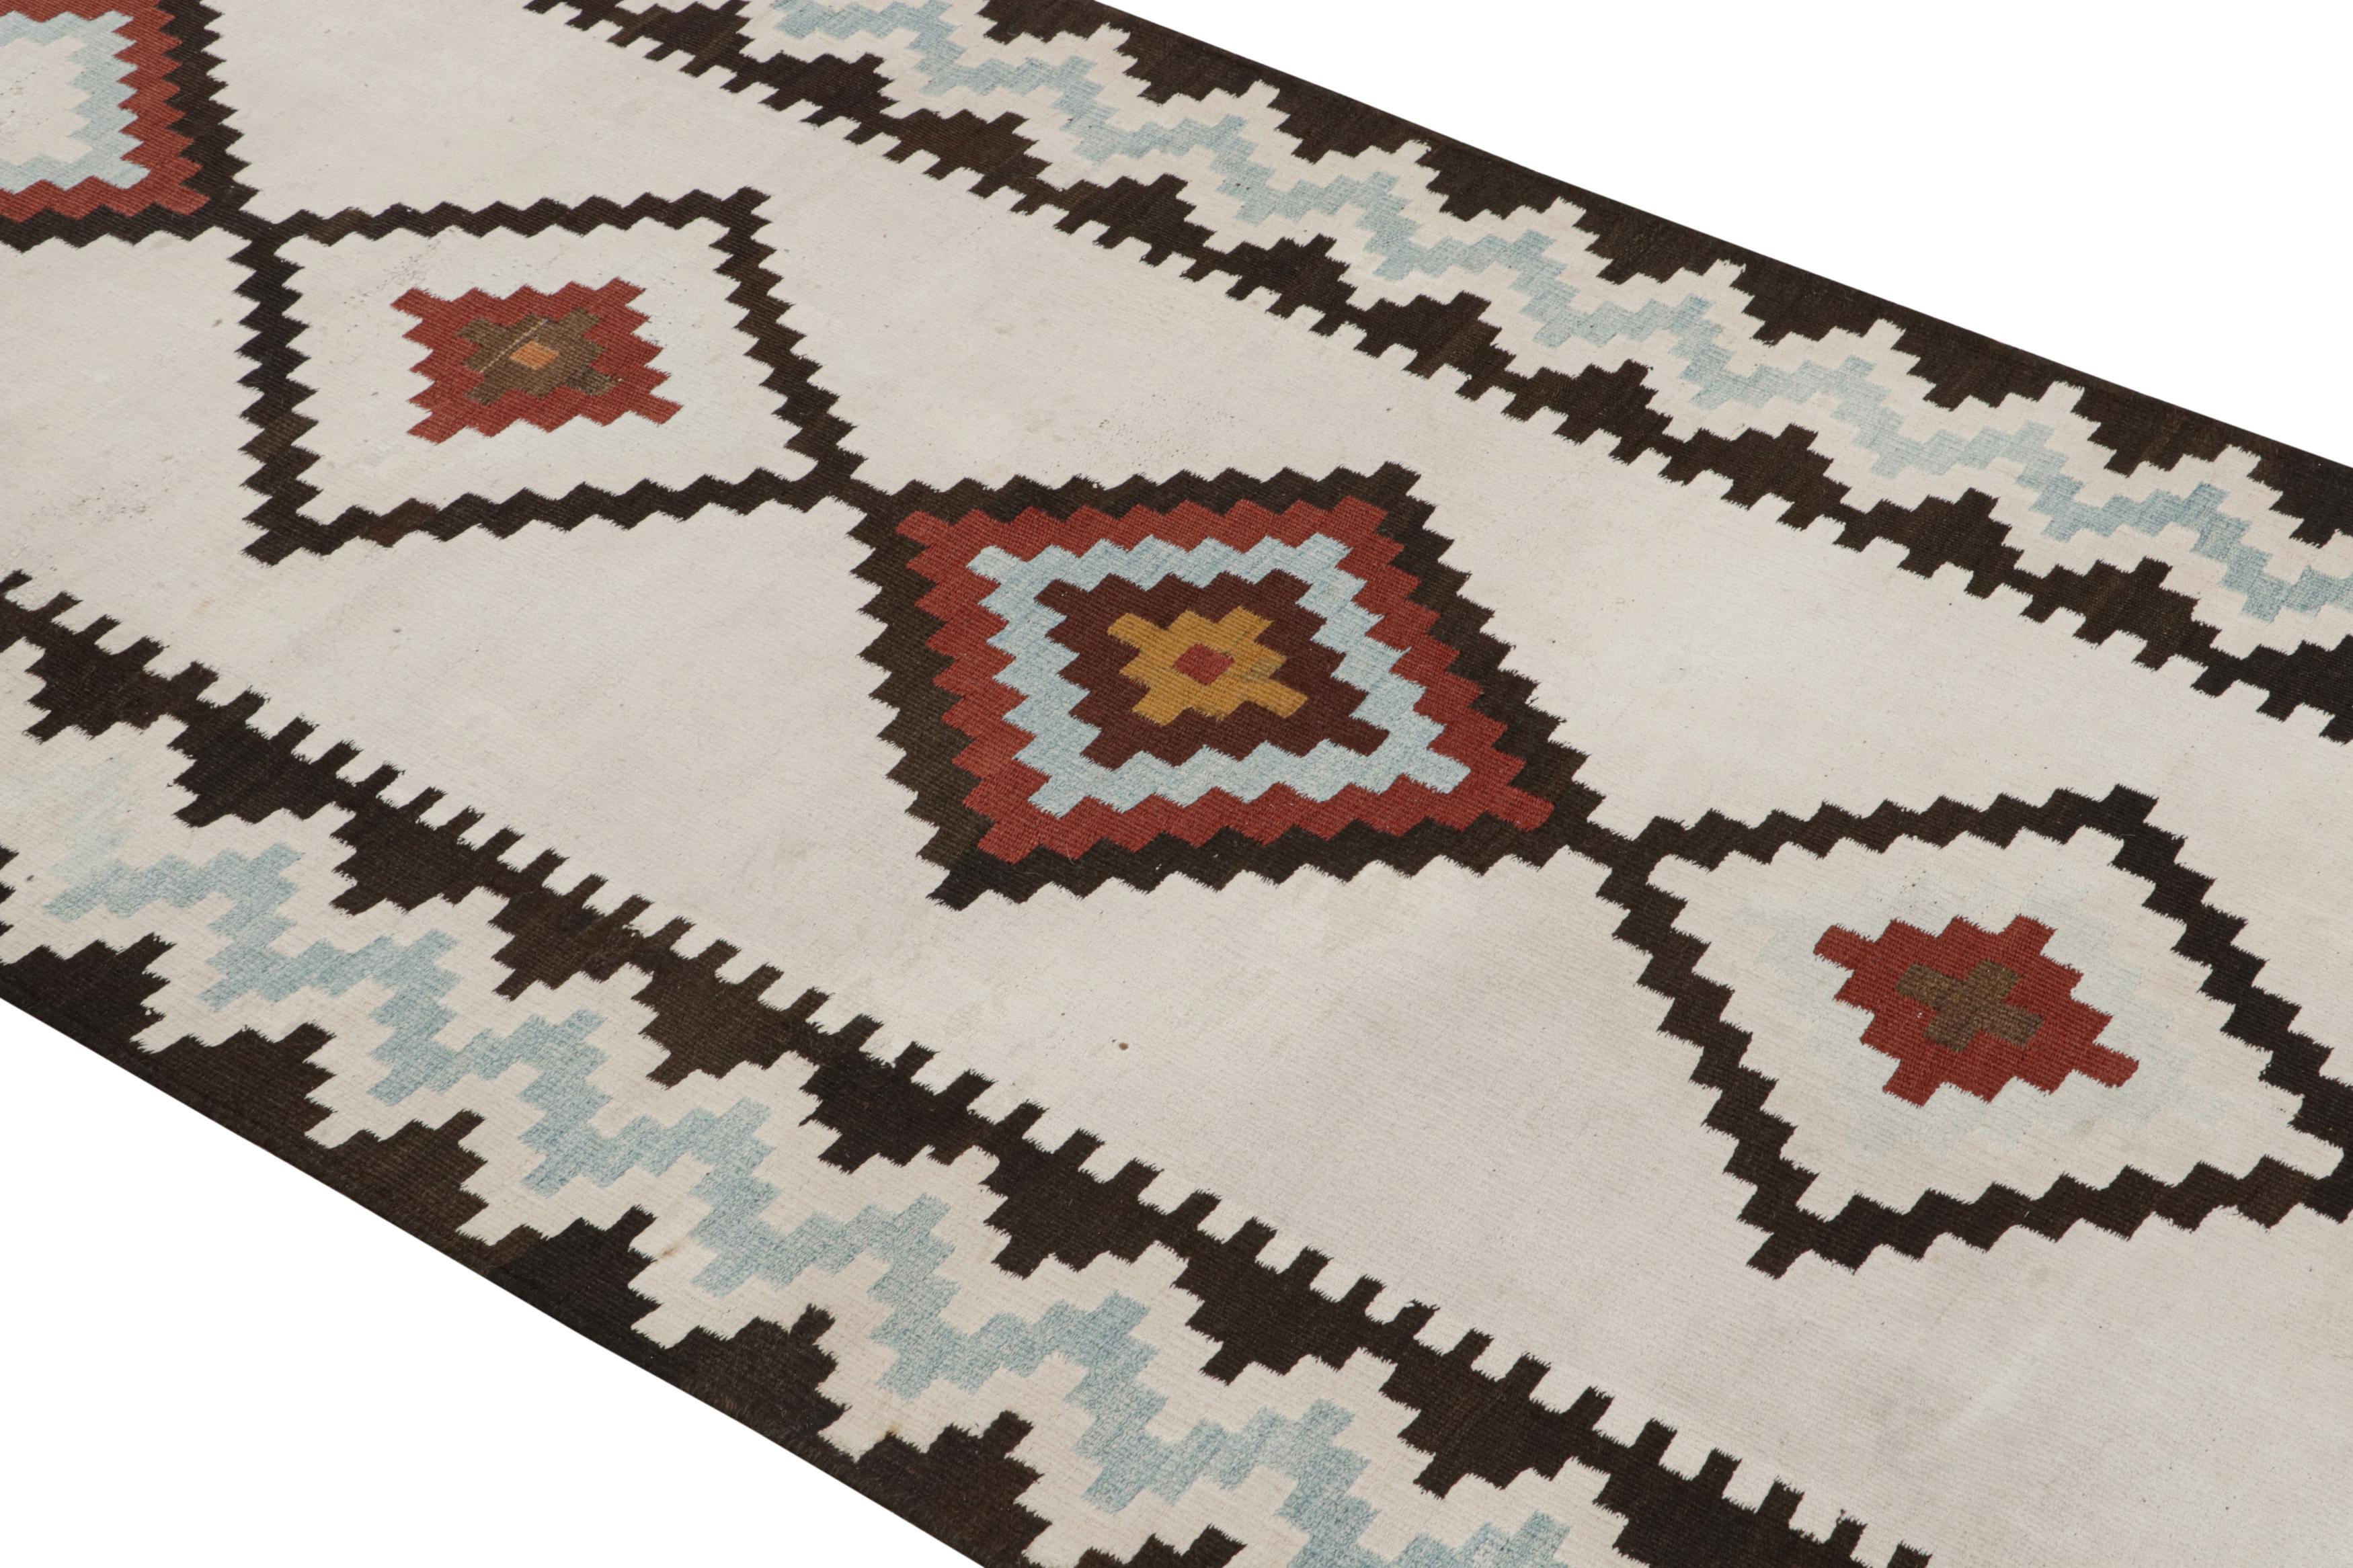 Handwoven in wool originating between 1950-1960, this vintage midcentury Persian Kilim runner hails from the Saveh region of West Persia, acclaimed for a particularly fine wool with a notable sheen distinguishing the most venerated items of the